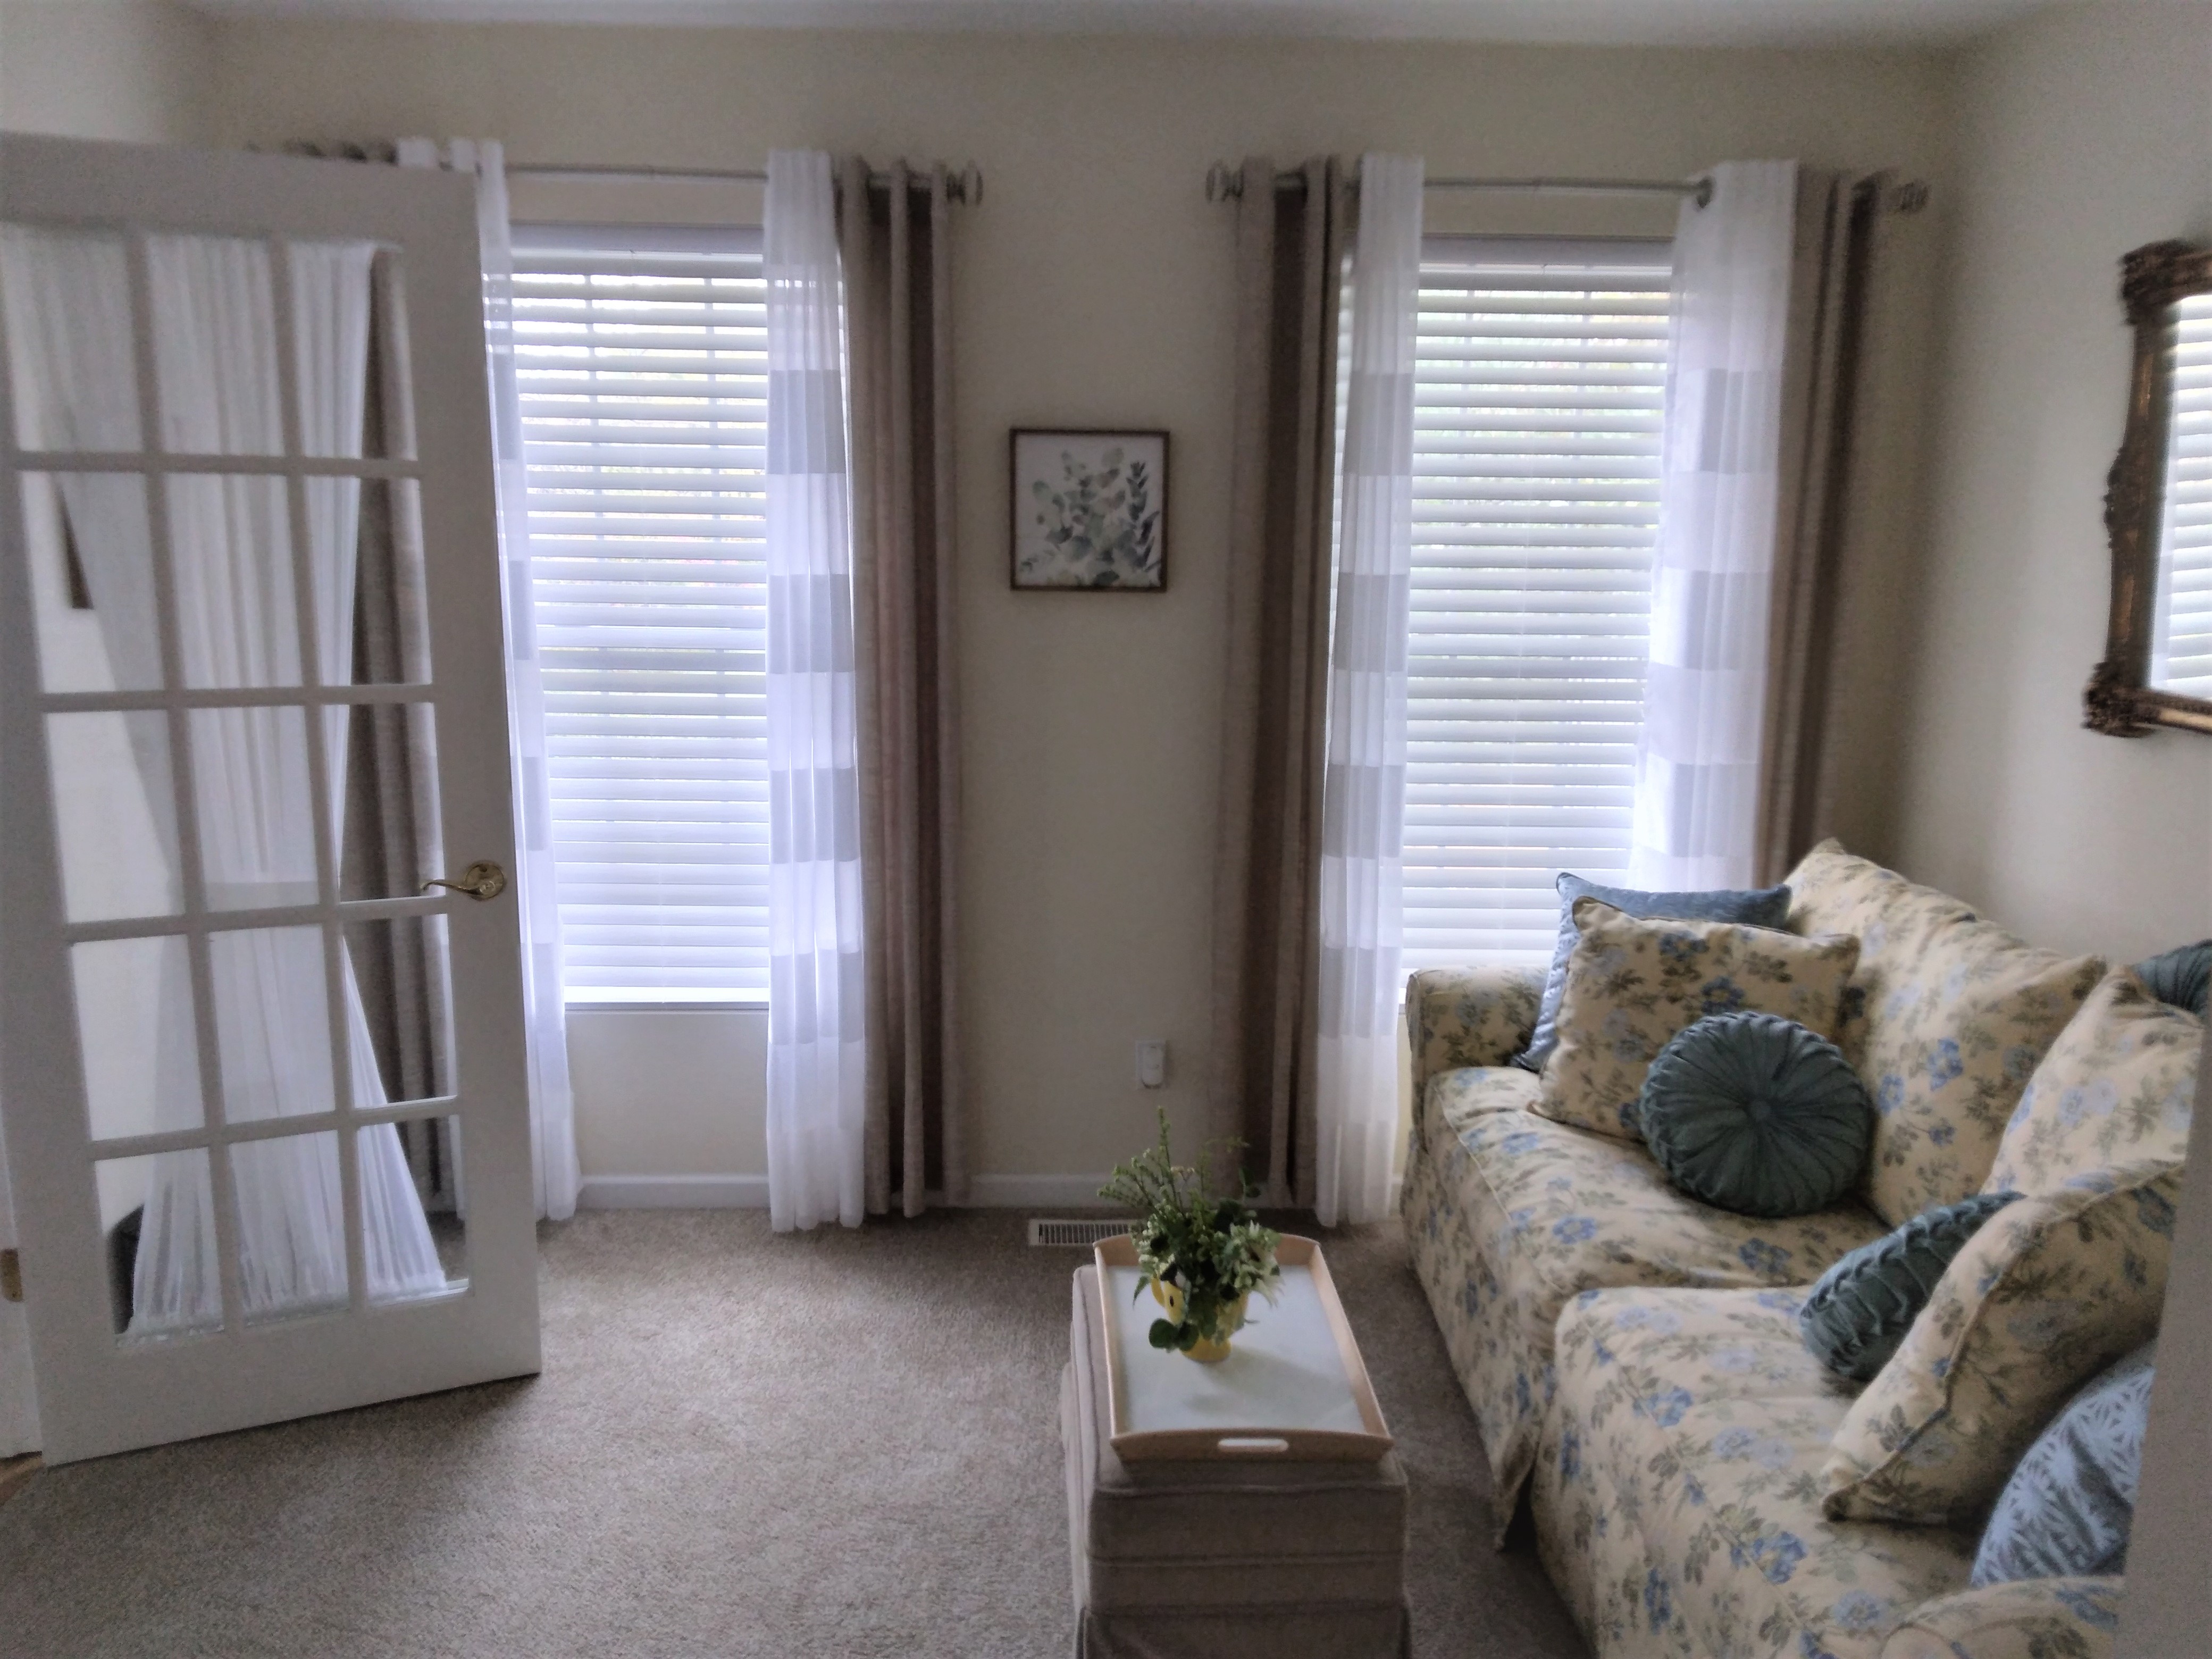 Cordless white faux wood blinds in Springfield Illinois family room.  BudgetBlinds  WindowCoverings  Blinds  SpringfieldIllinois